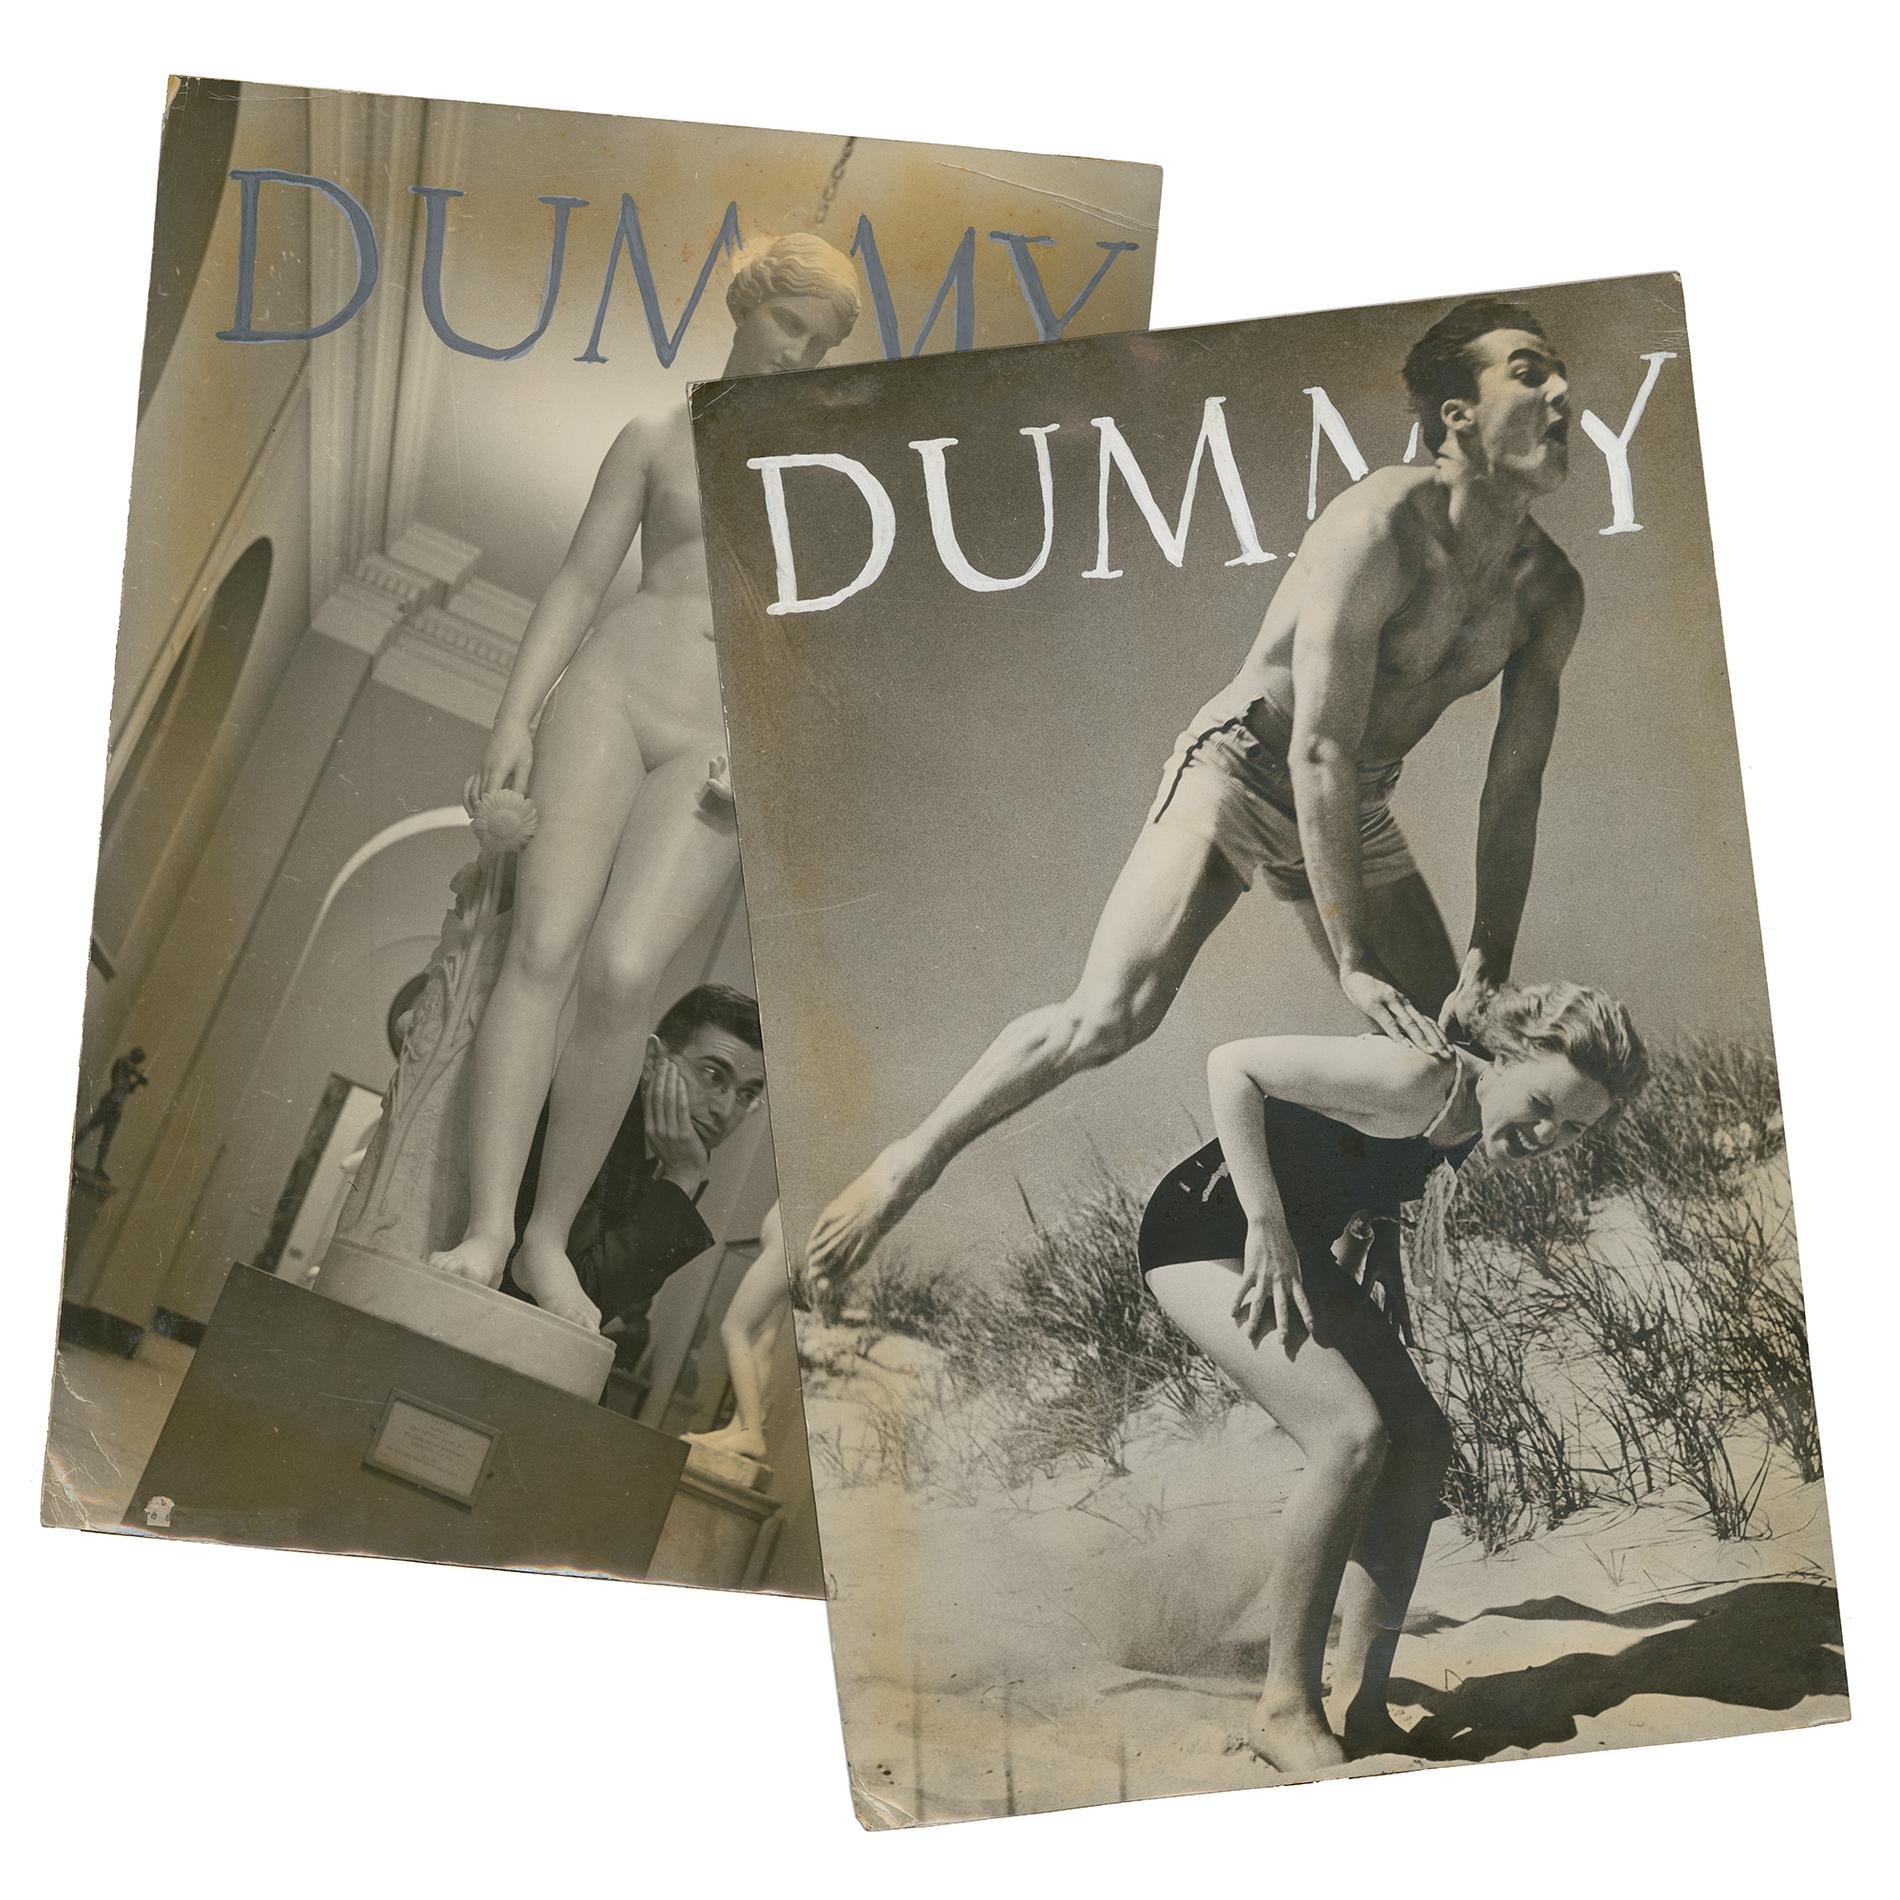 Two magazine covers with the word "dummy" in large letters as the title; the first cover shows a man and woman having fun at the beach.